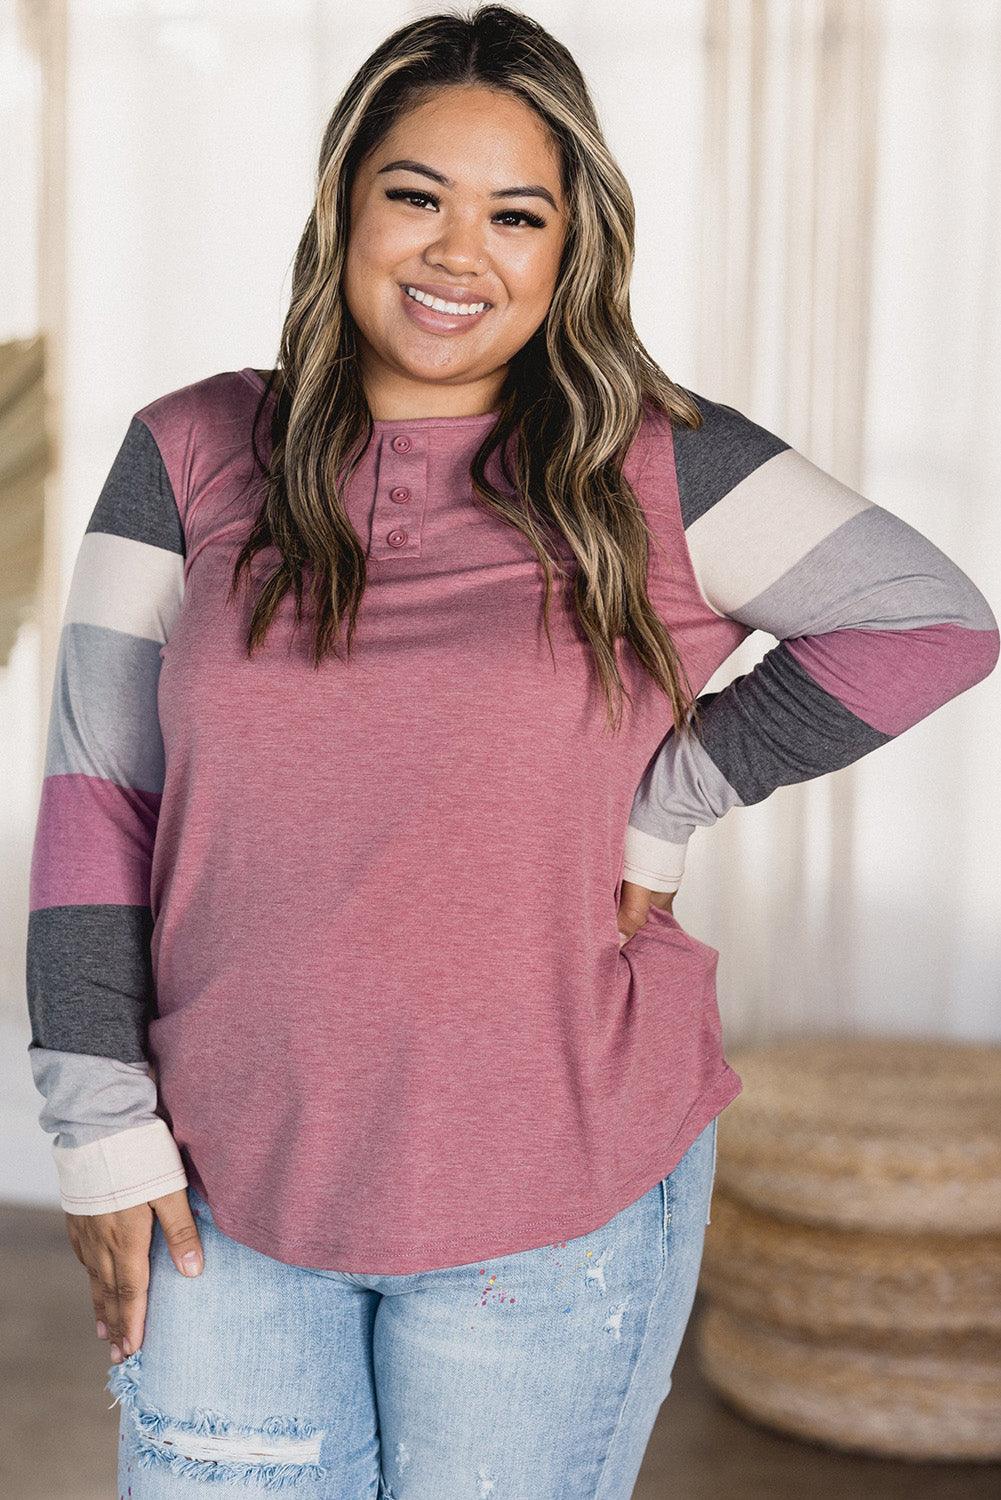 Pink Candy Striping Sleeve Plus Size Top - L & M Kee, LLC